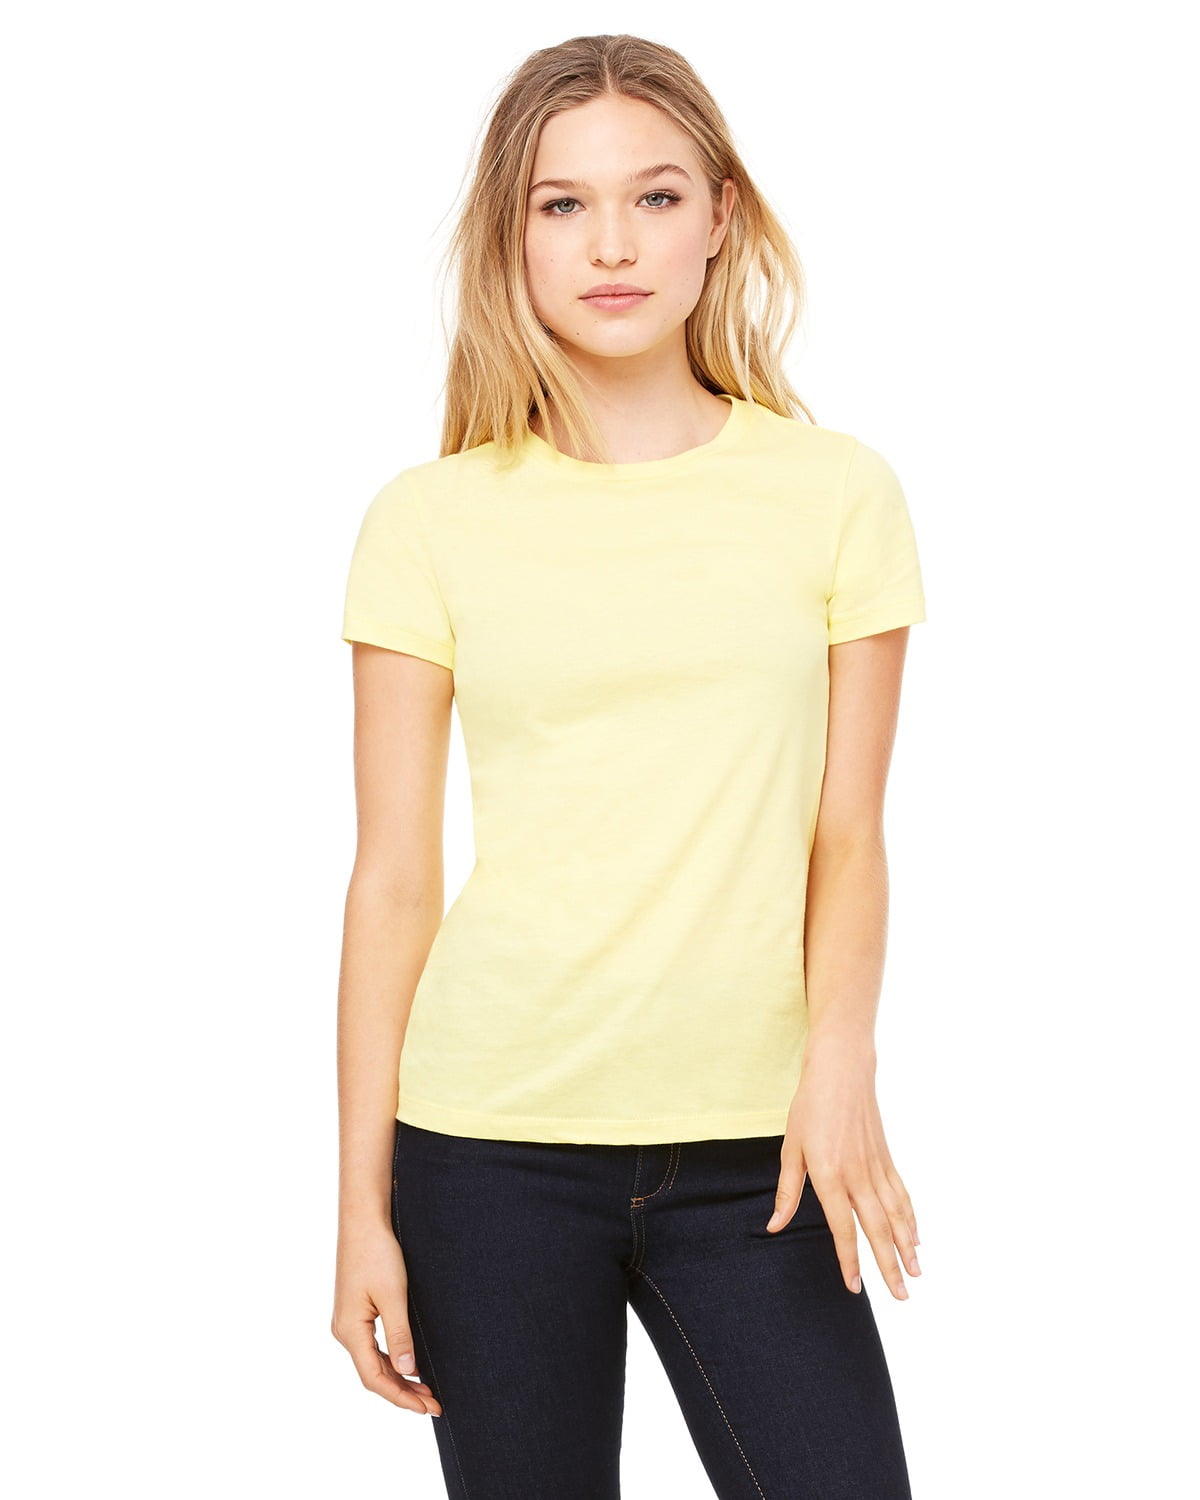 BELLA+CANVAS - The Bella + Canvas Ladies The Favorite T-Shirt - YELLOW ...